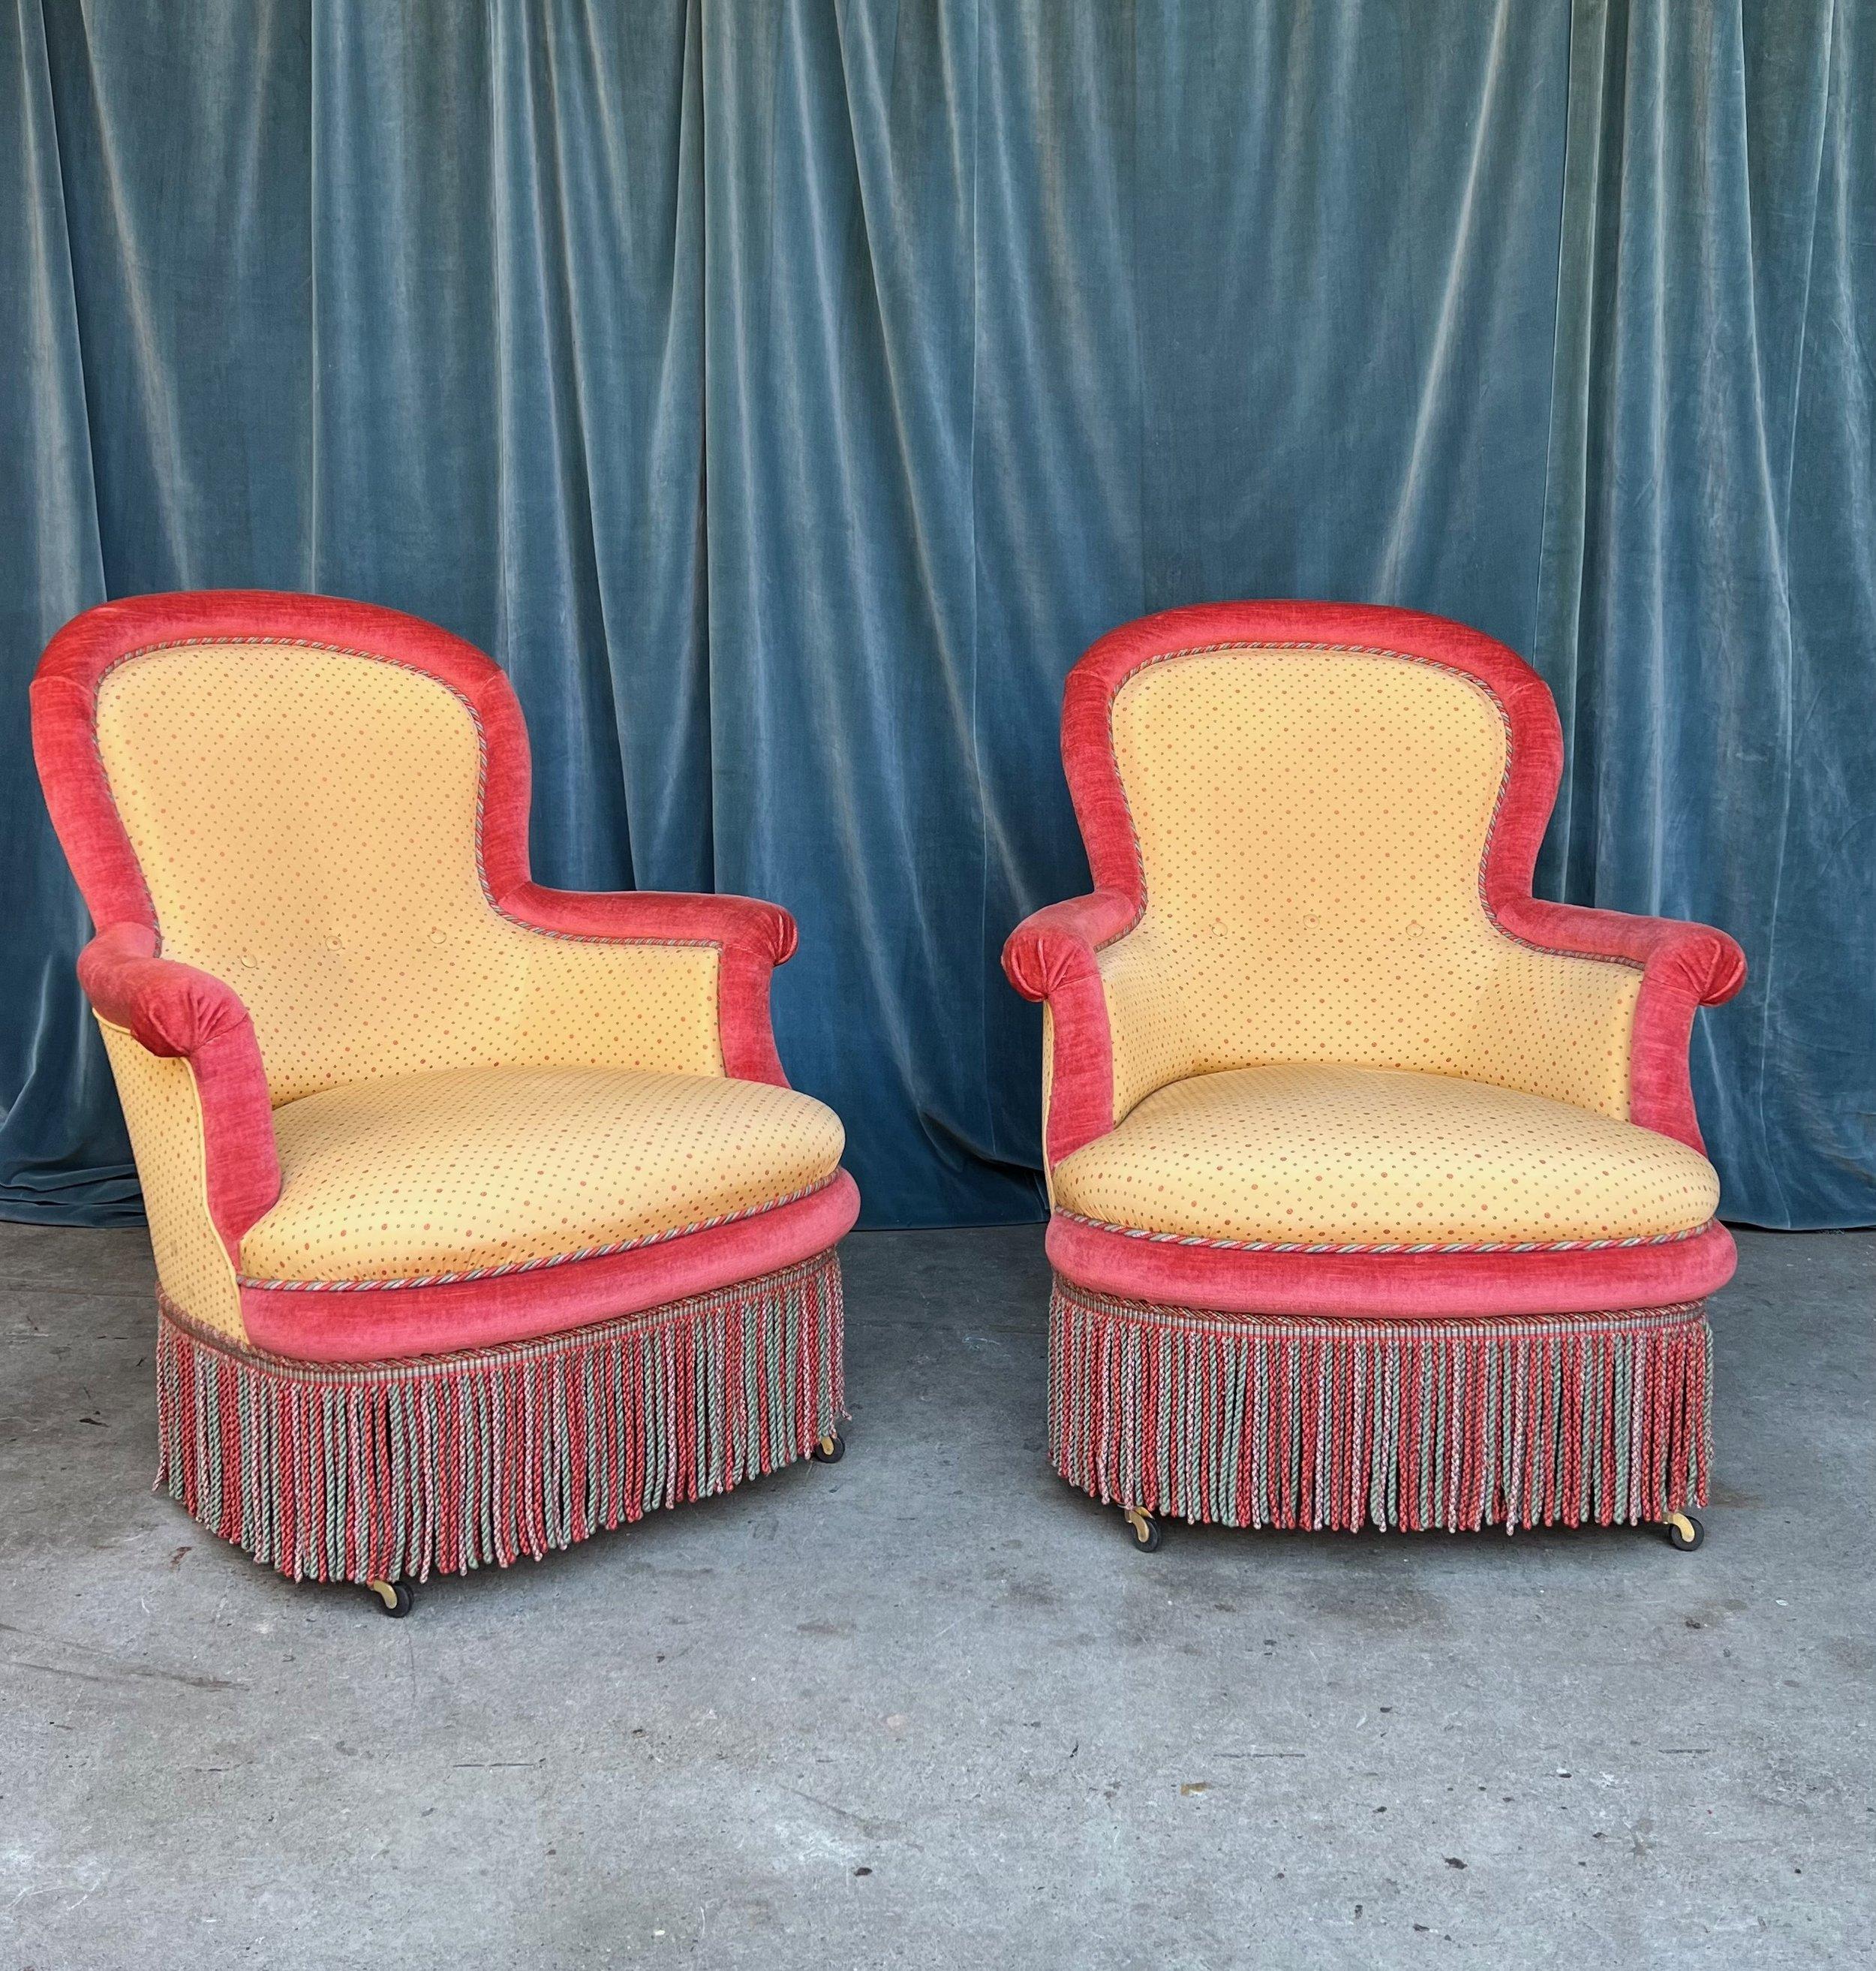 A unique and colorful pair of 19th century French Napoleon III armchairs upholstered in a golden yellow patterned fabric and a contrasting red velvet and featuring multicolored bullion fringe for an opulent final touch. We have added caaters to the